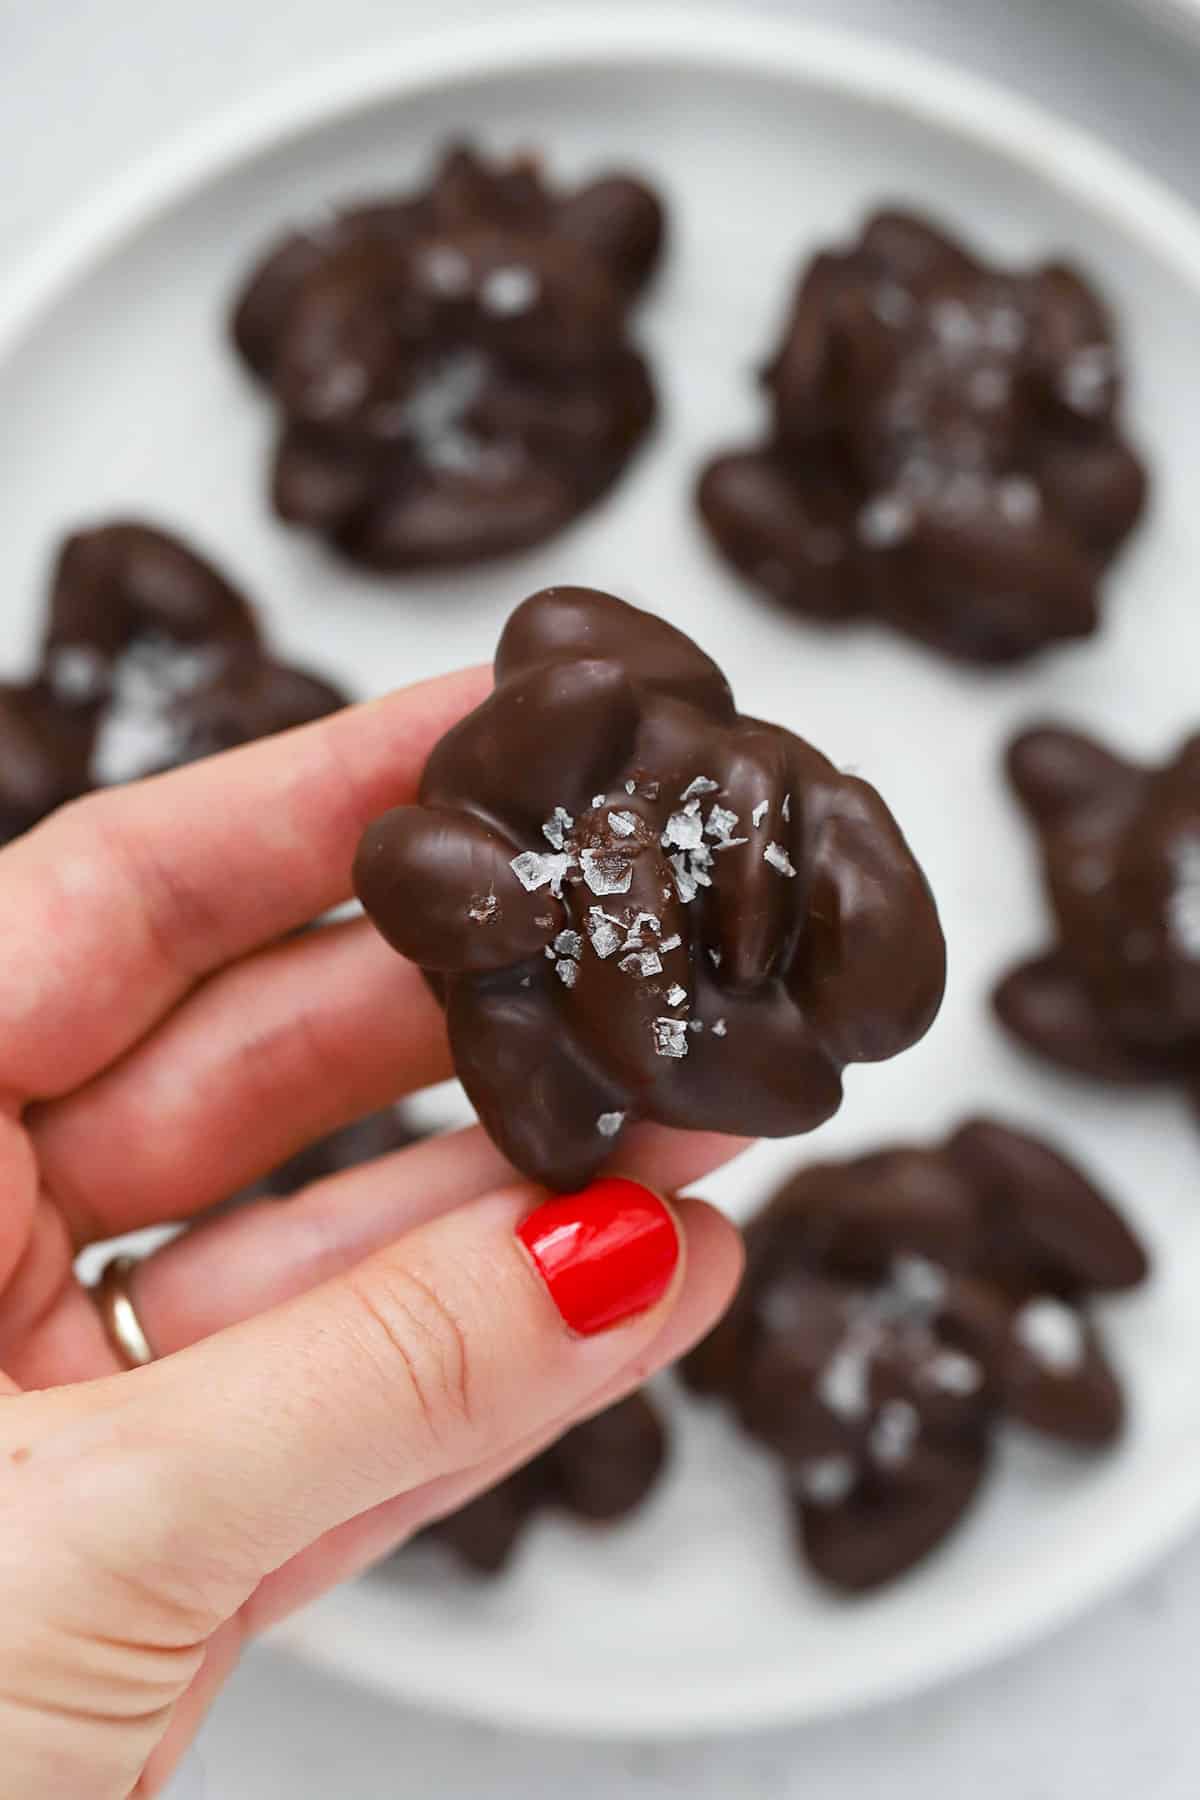 Hand holding up a chocolate almond cluster with sea salt